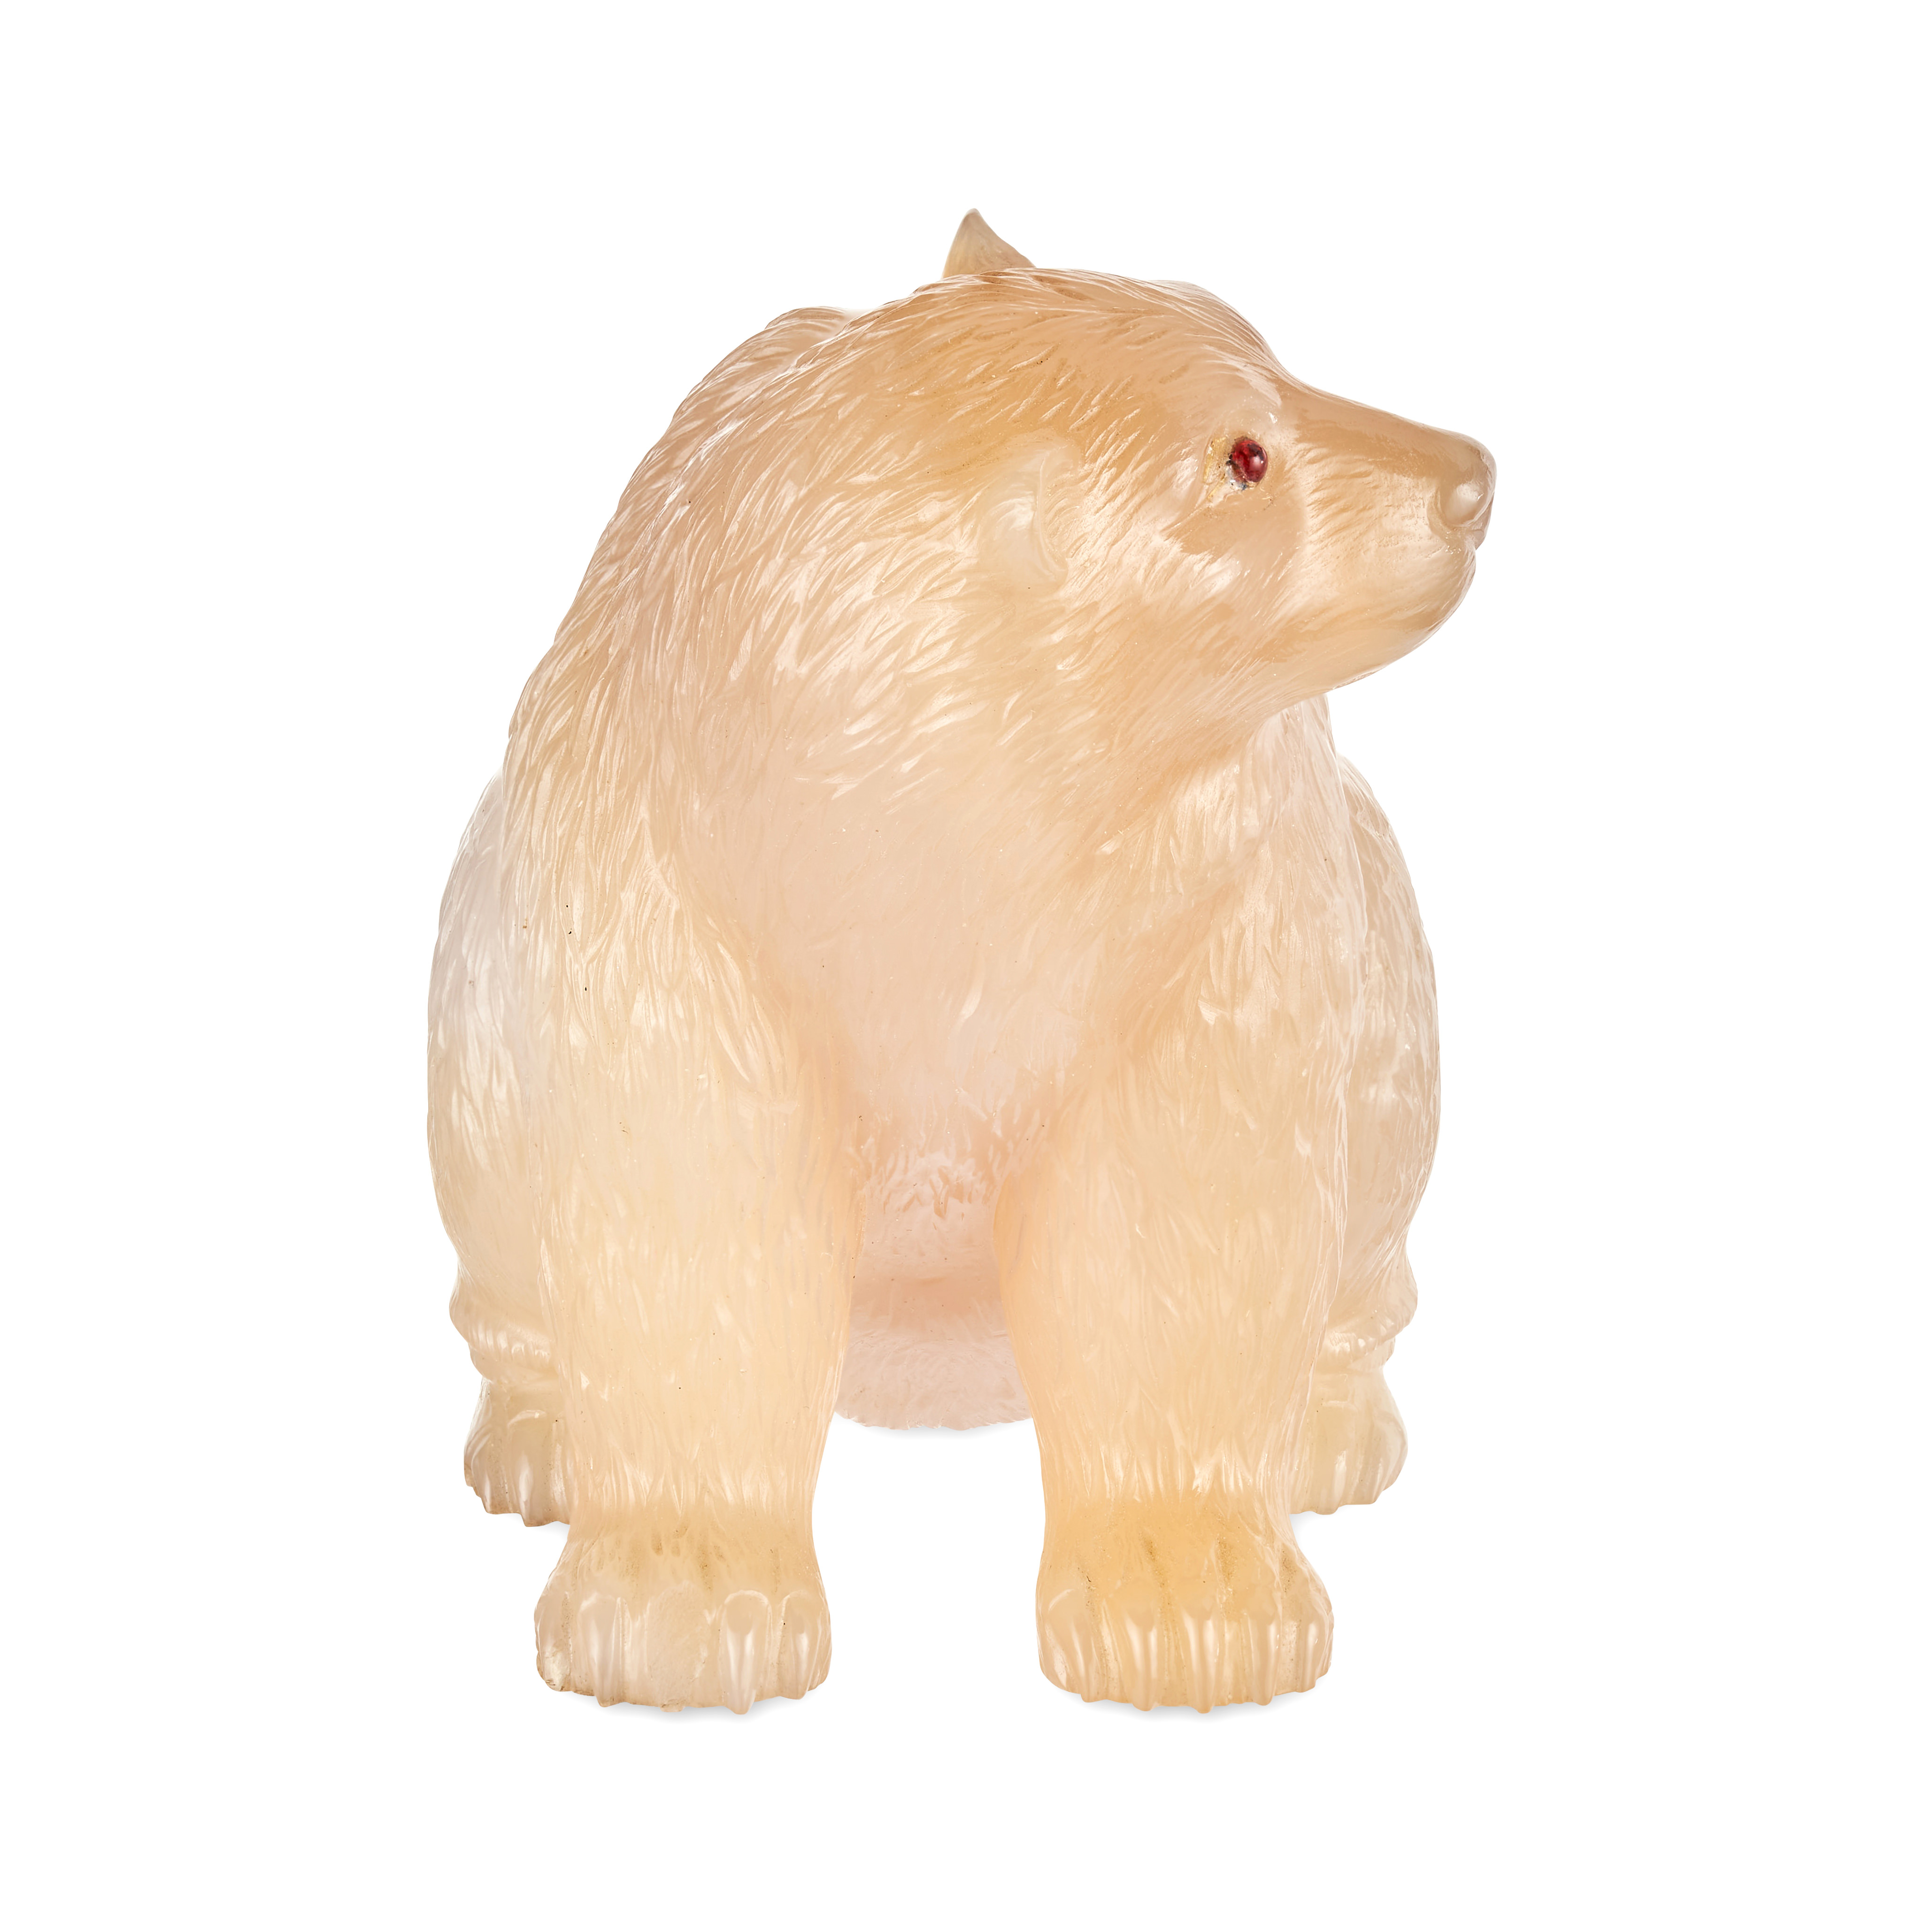 FABERGE, A RARE JEWELLED AGATE MODEL OF A POLAR BEAR, ST PETERSBURG, CIRCA 1900 - Image 2 of 10